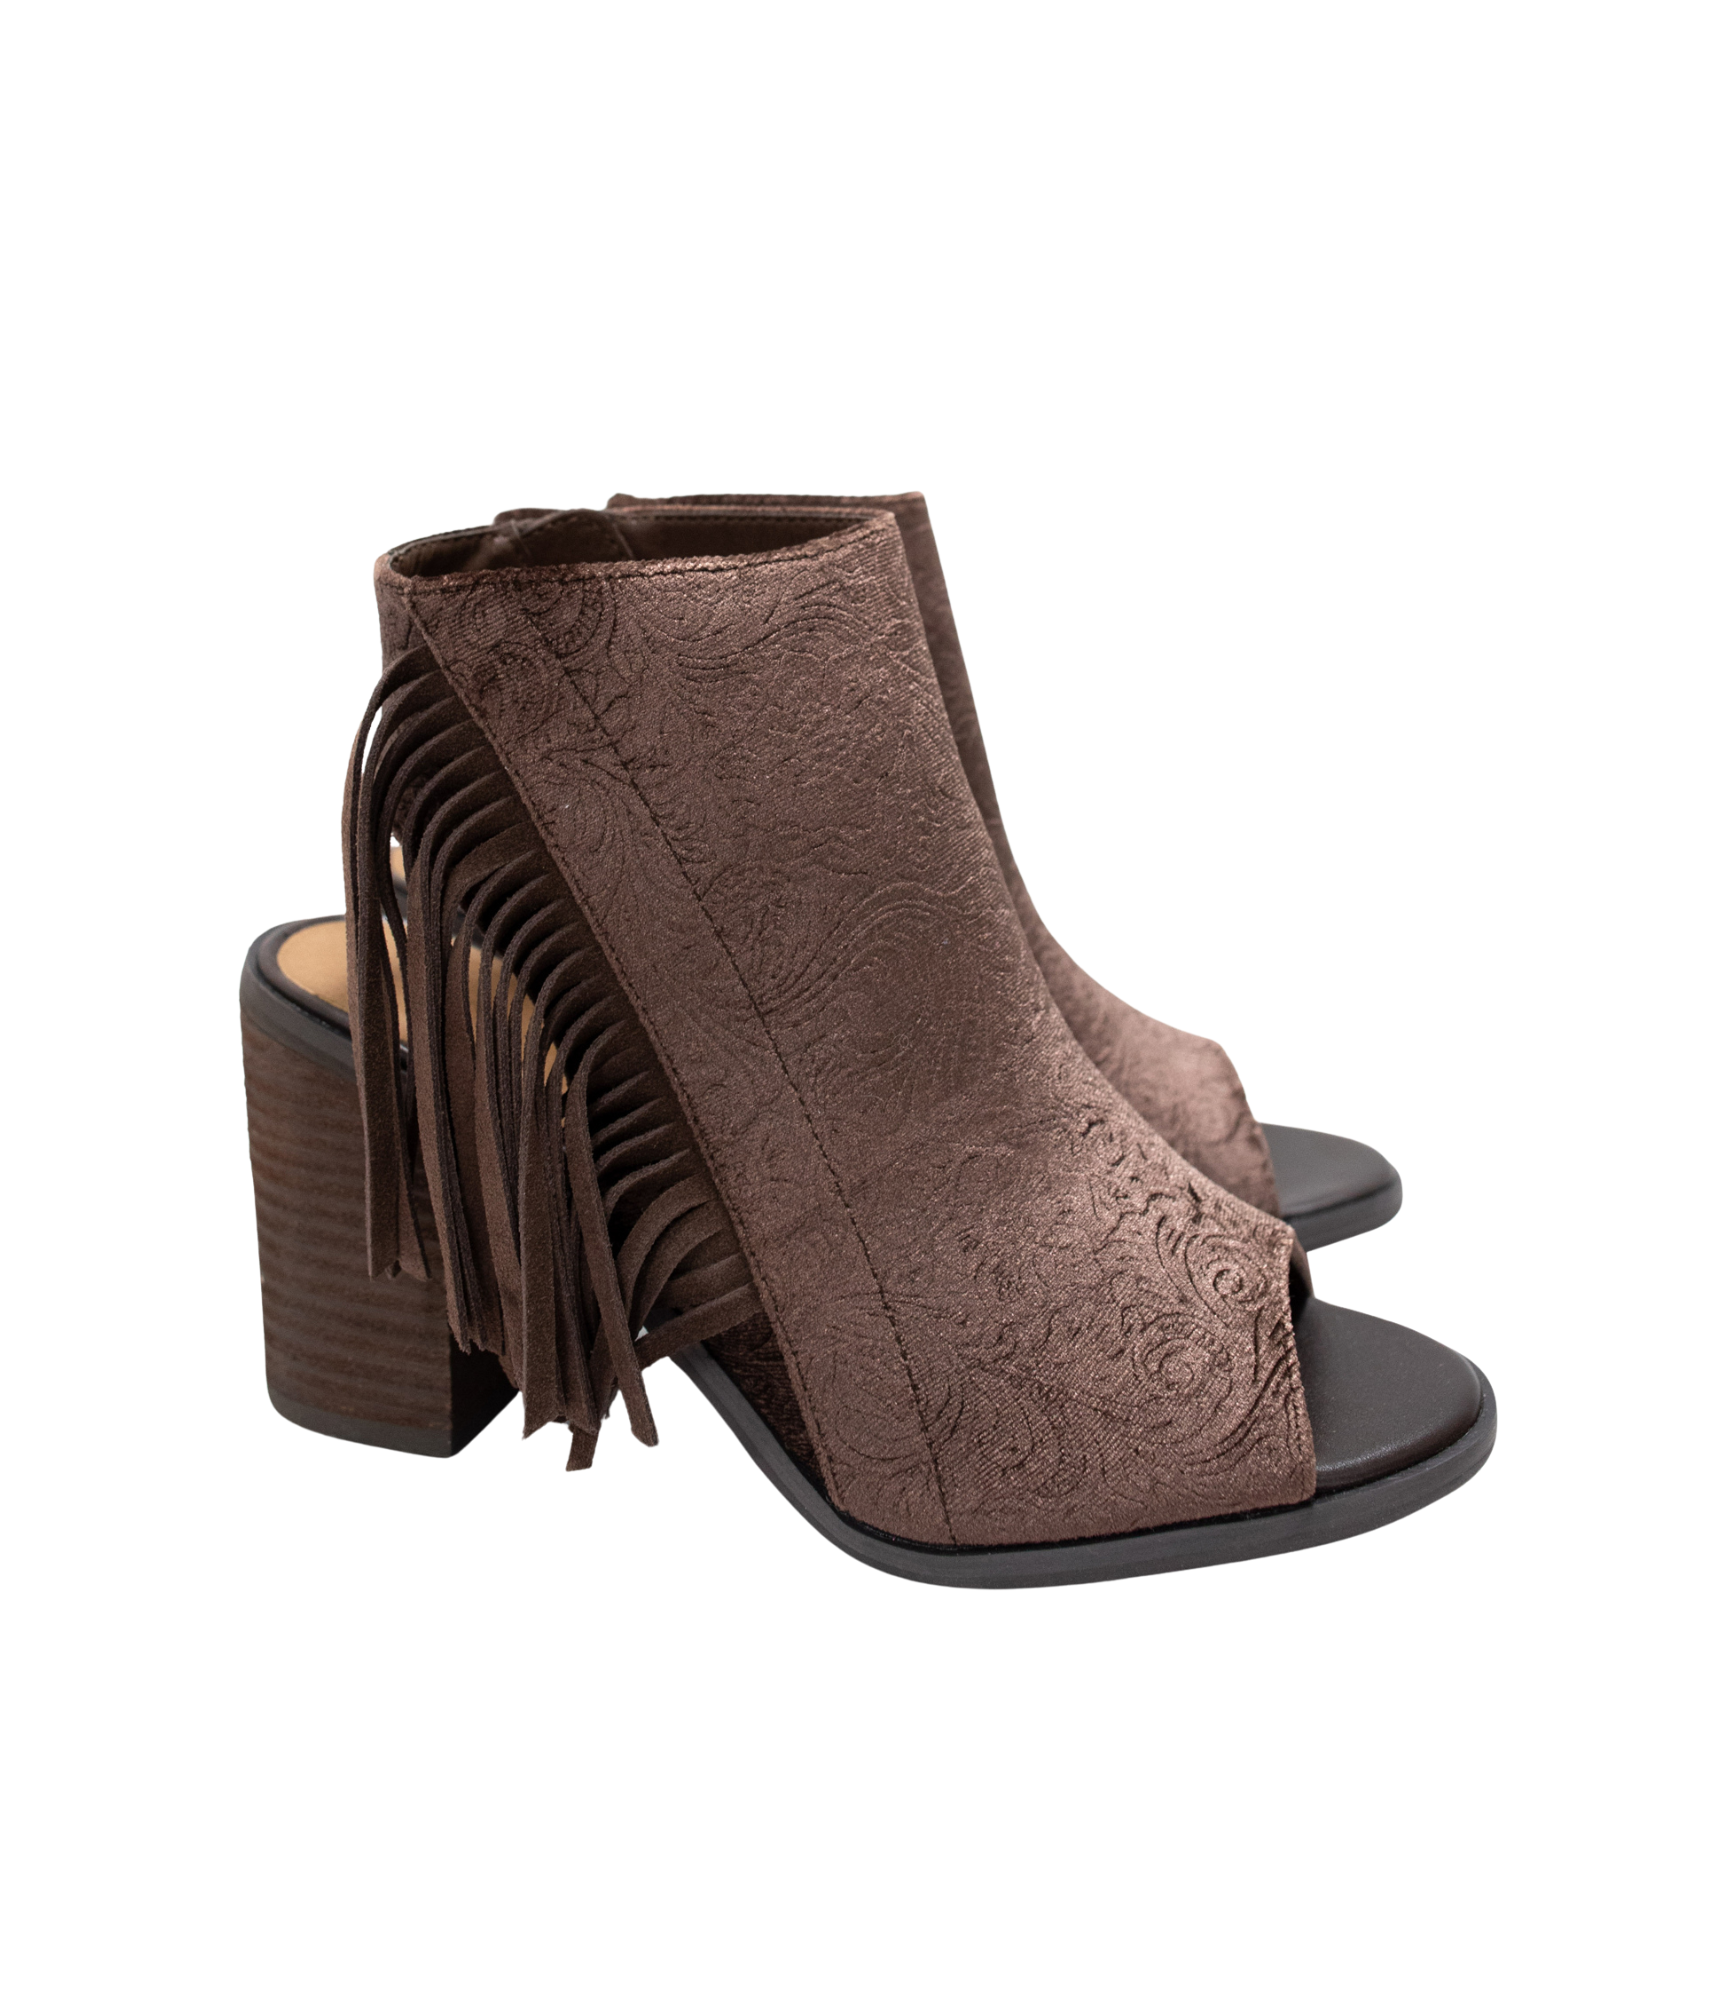 Pony Express Fringe Open Toed Ankle Boot in Brown